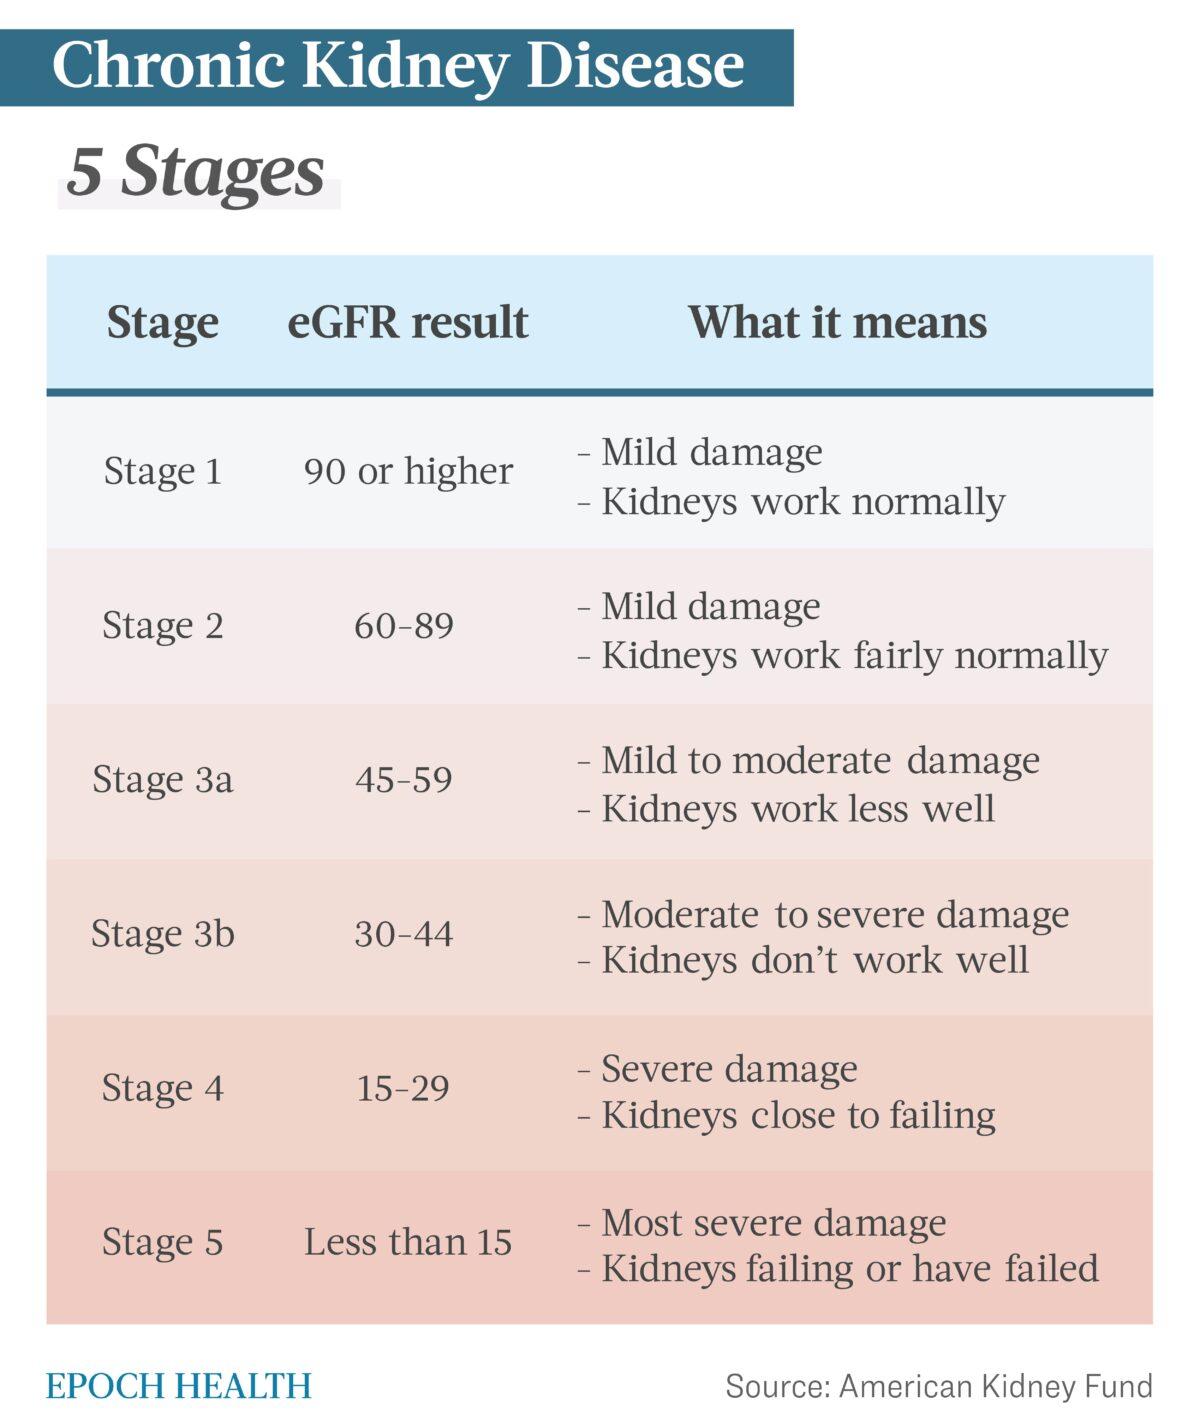 Chronic kidney disease has five stages, with the last stage typically requiring dialysis or a kidney transplant. (The Epoch Times)